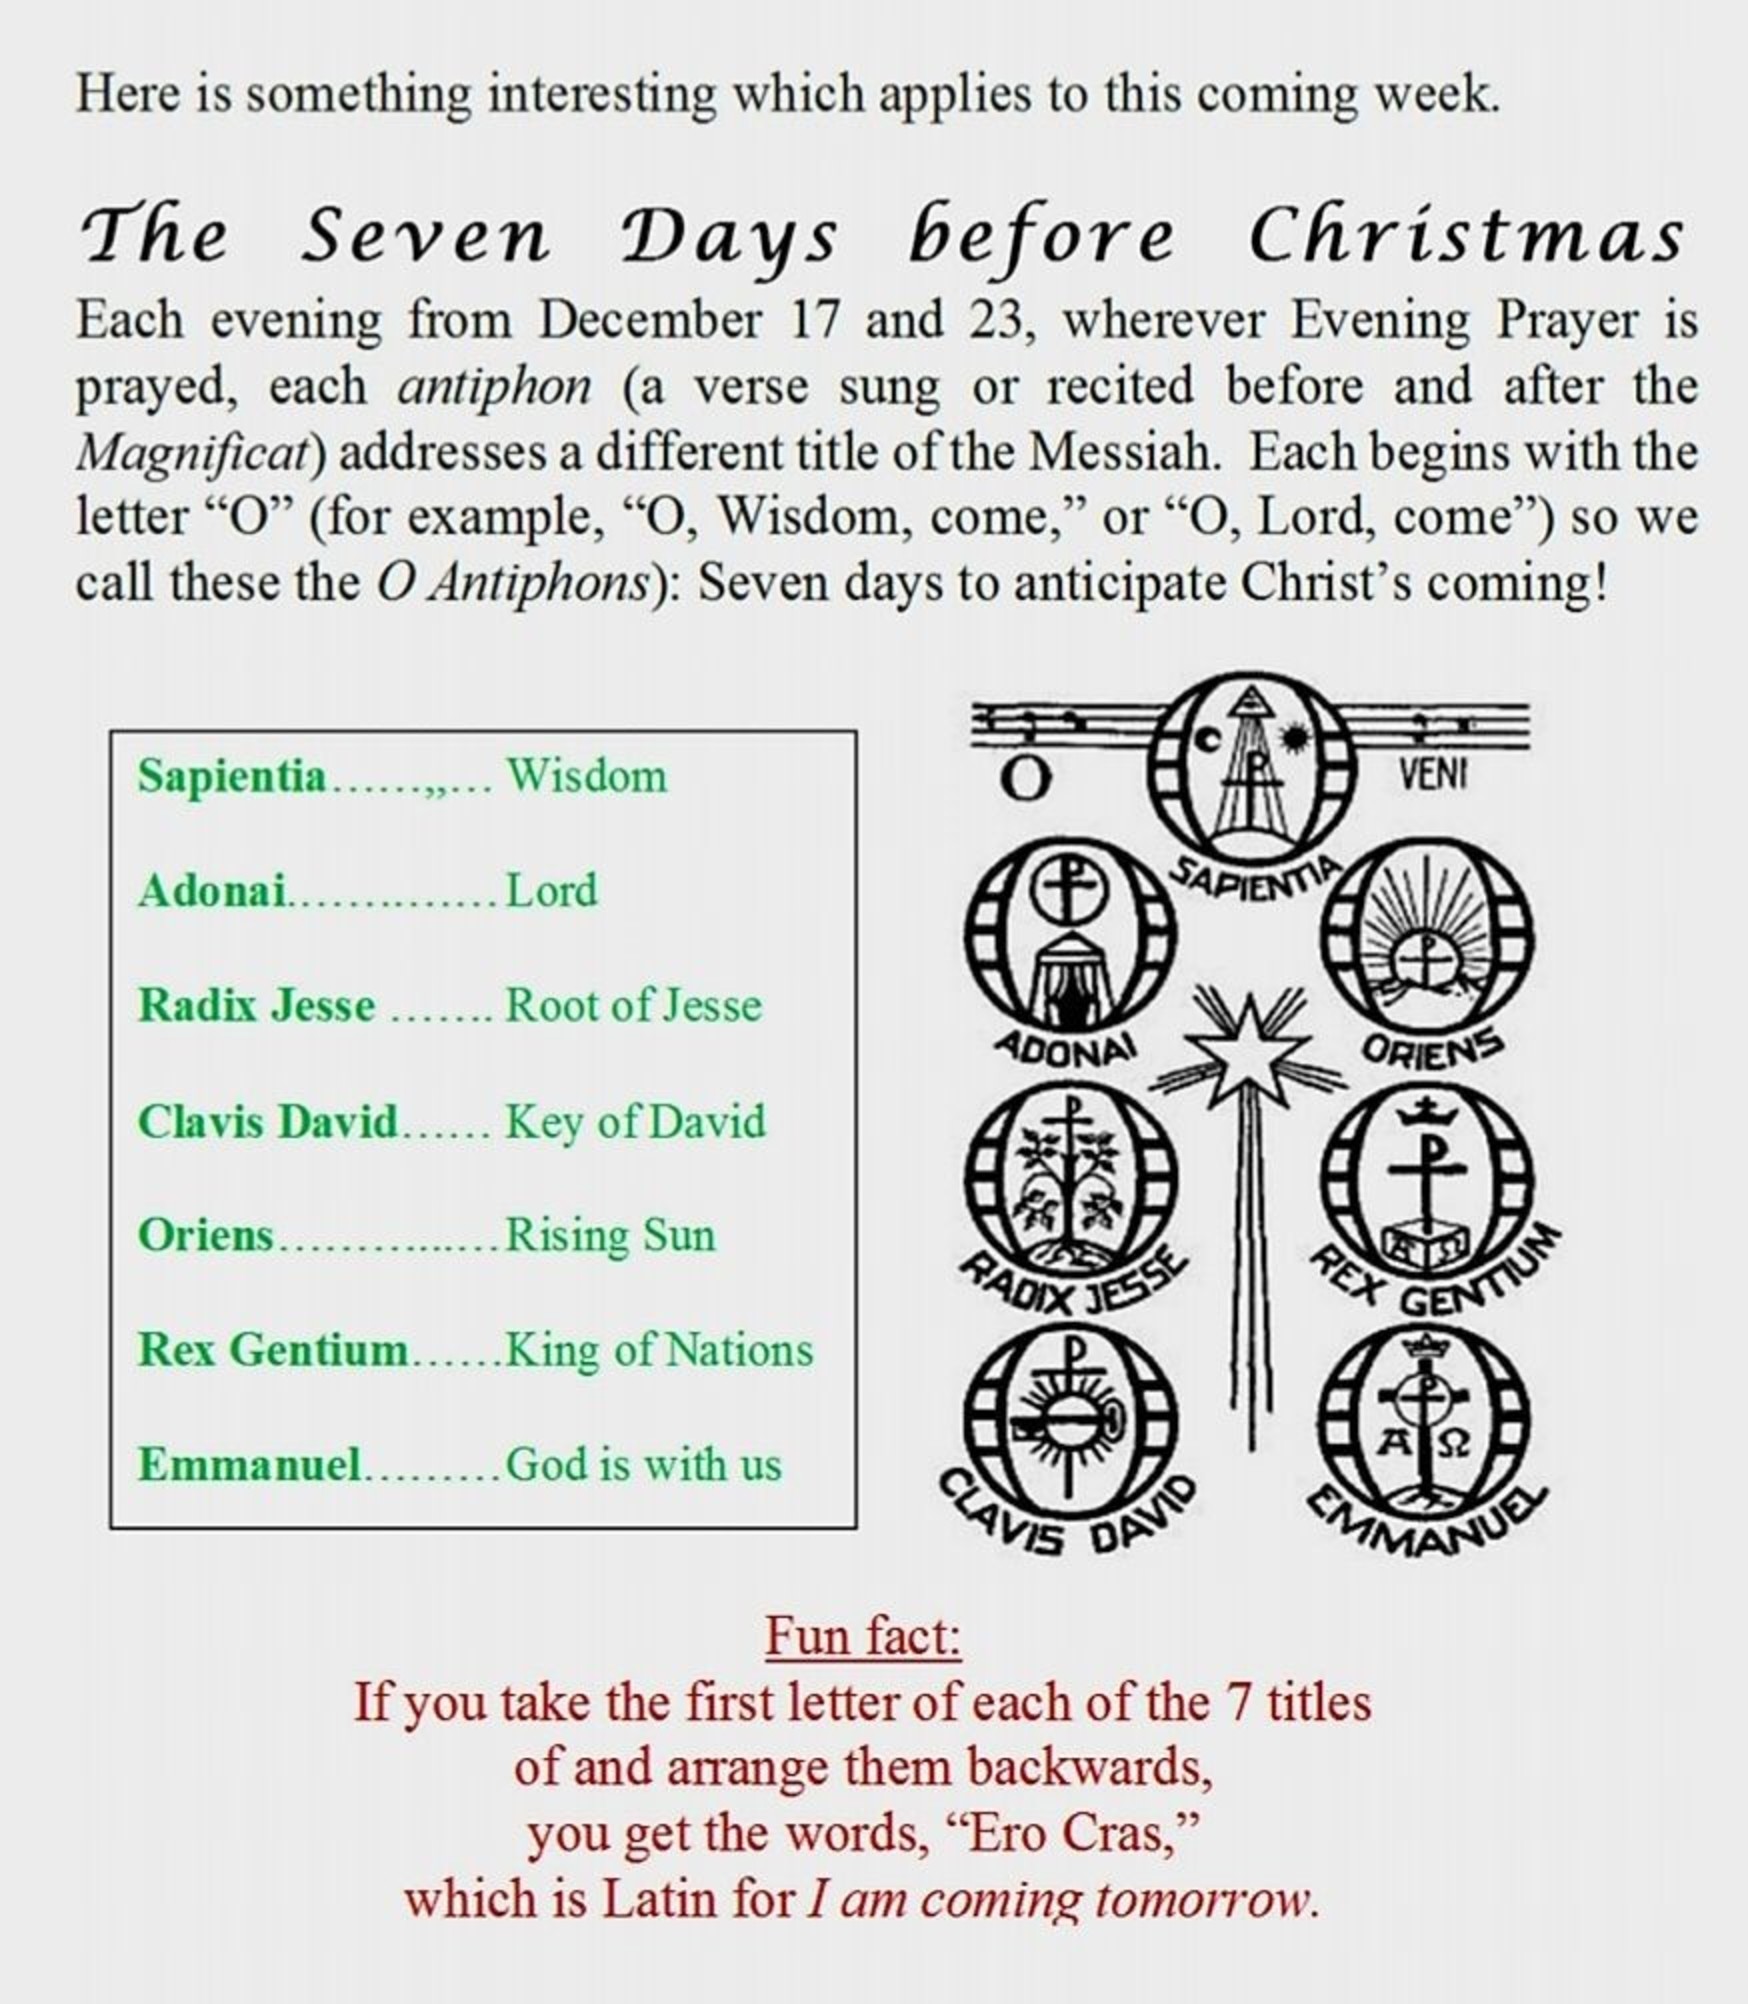 The Seven Days before Christmas